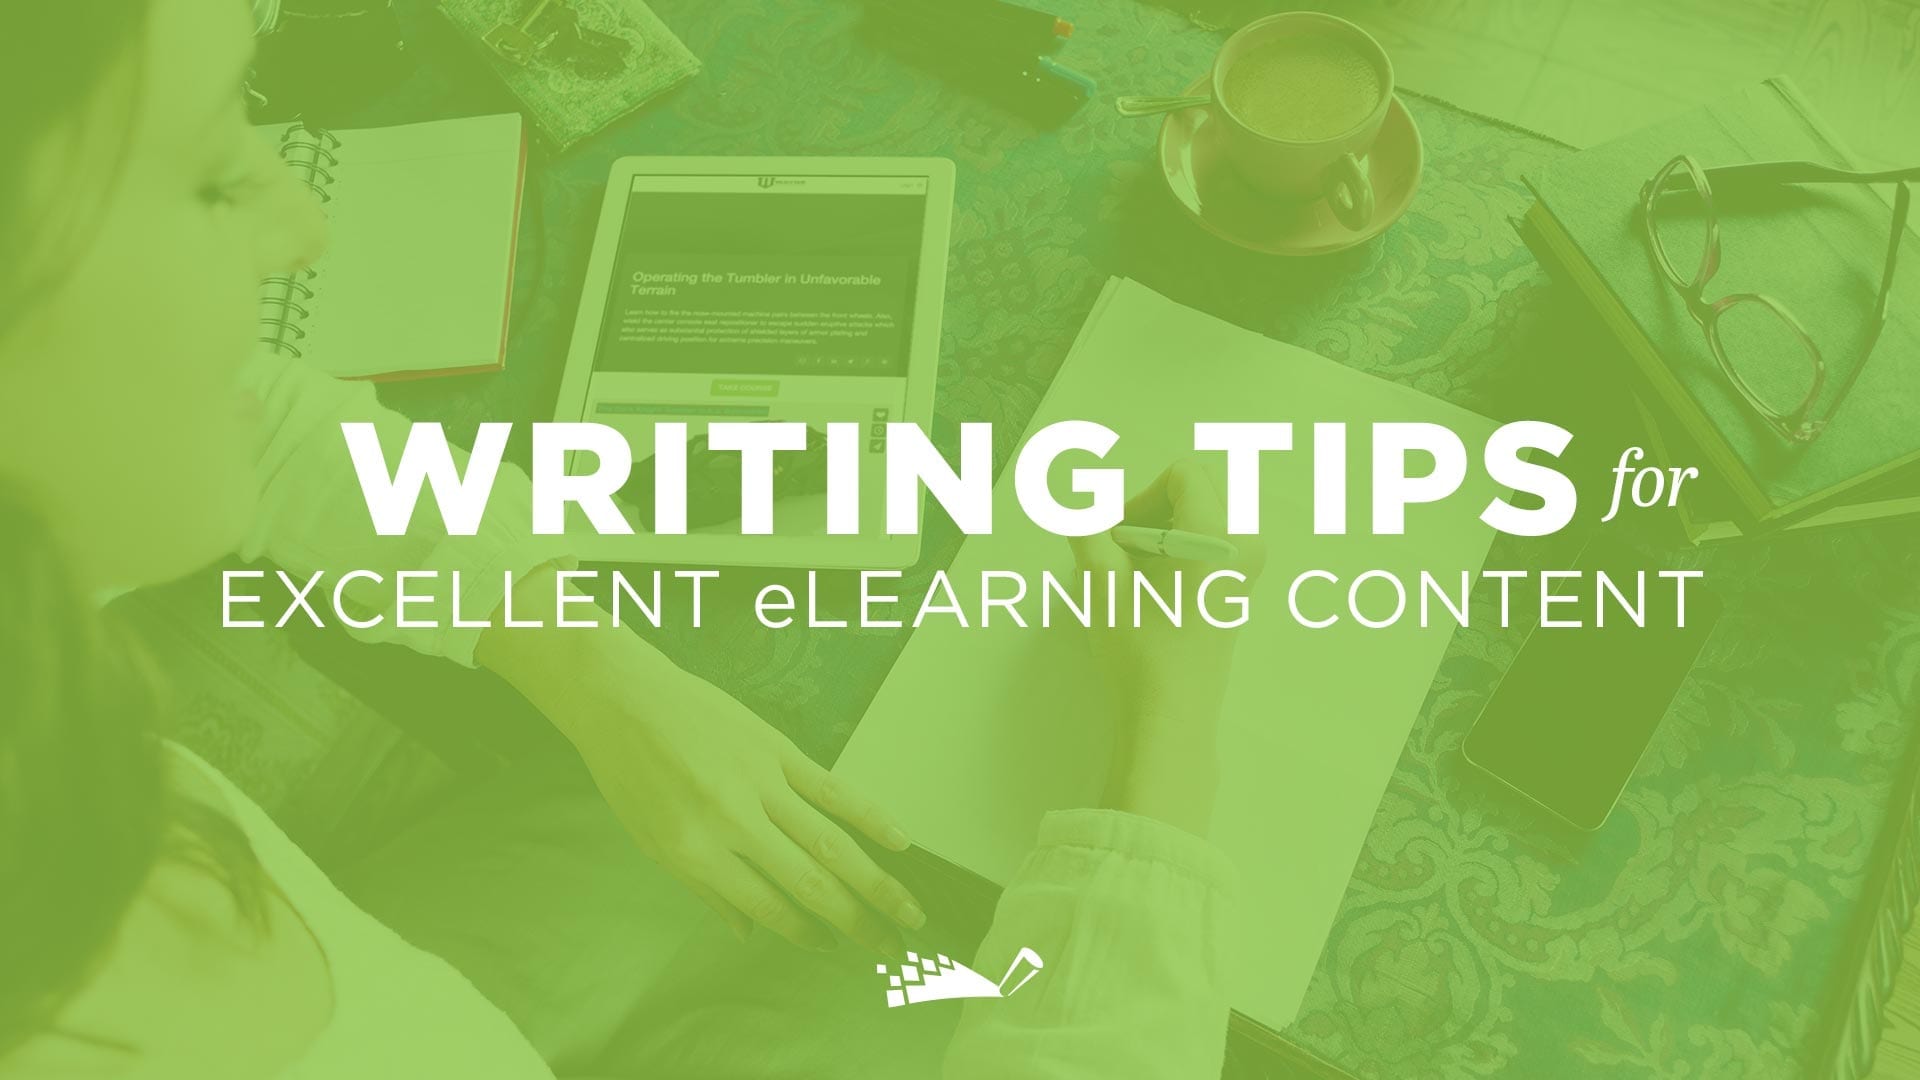 DigitalChalk: 5 Writing Tricks for Excellent eLearning Content